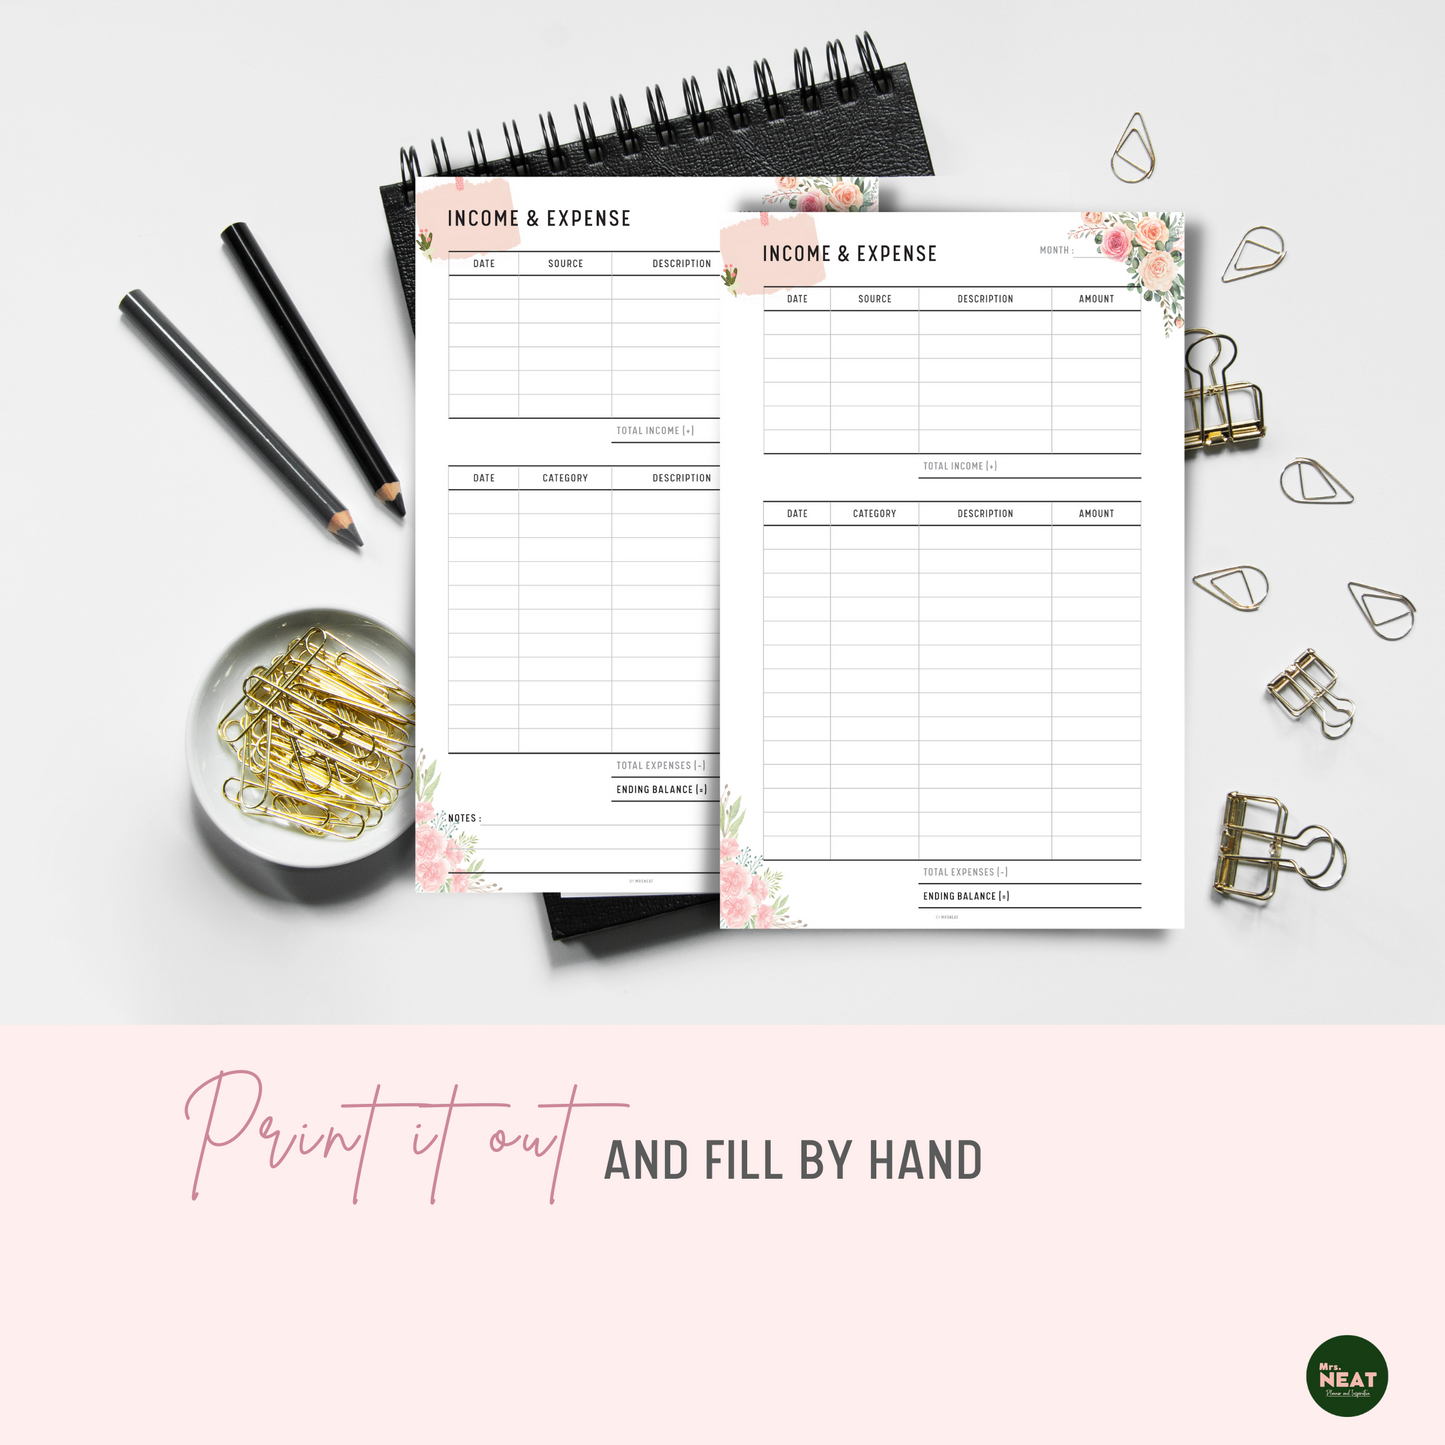 2 pages of Floral Income and Expense Tracker Printable printed out on paper and put on the black book